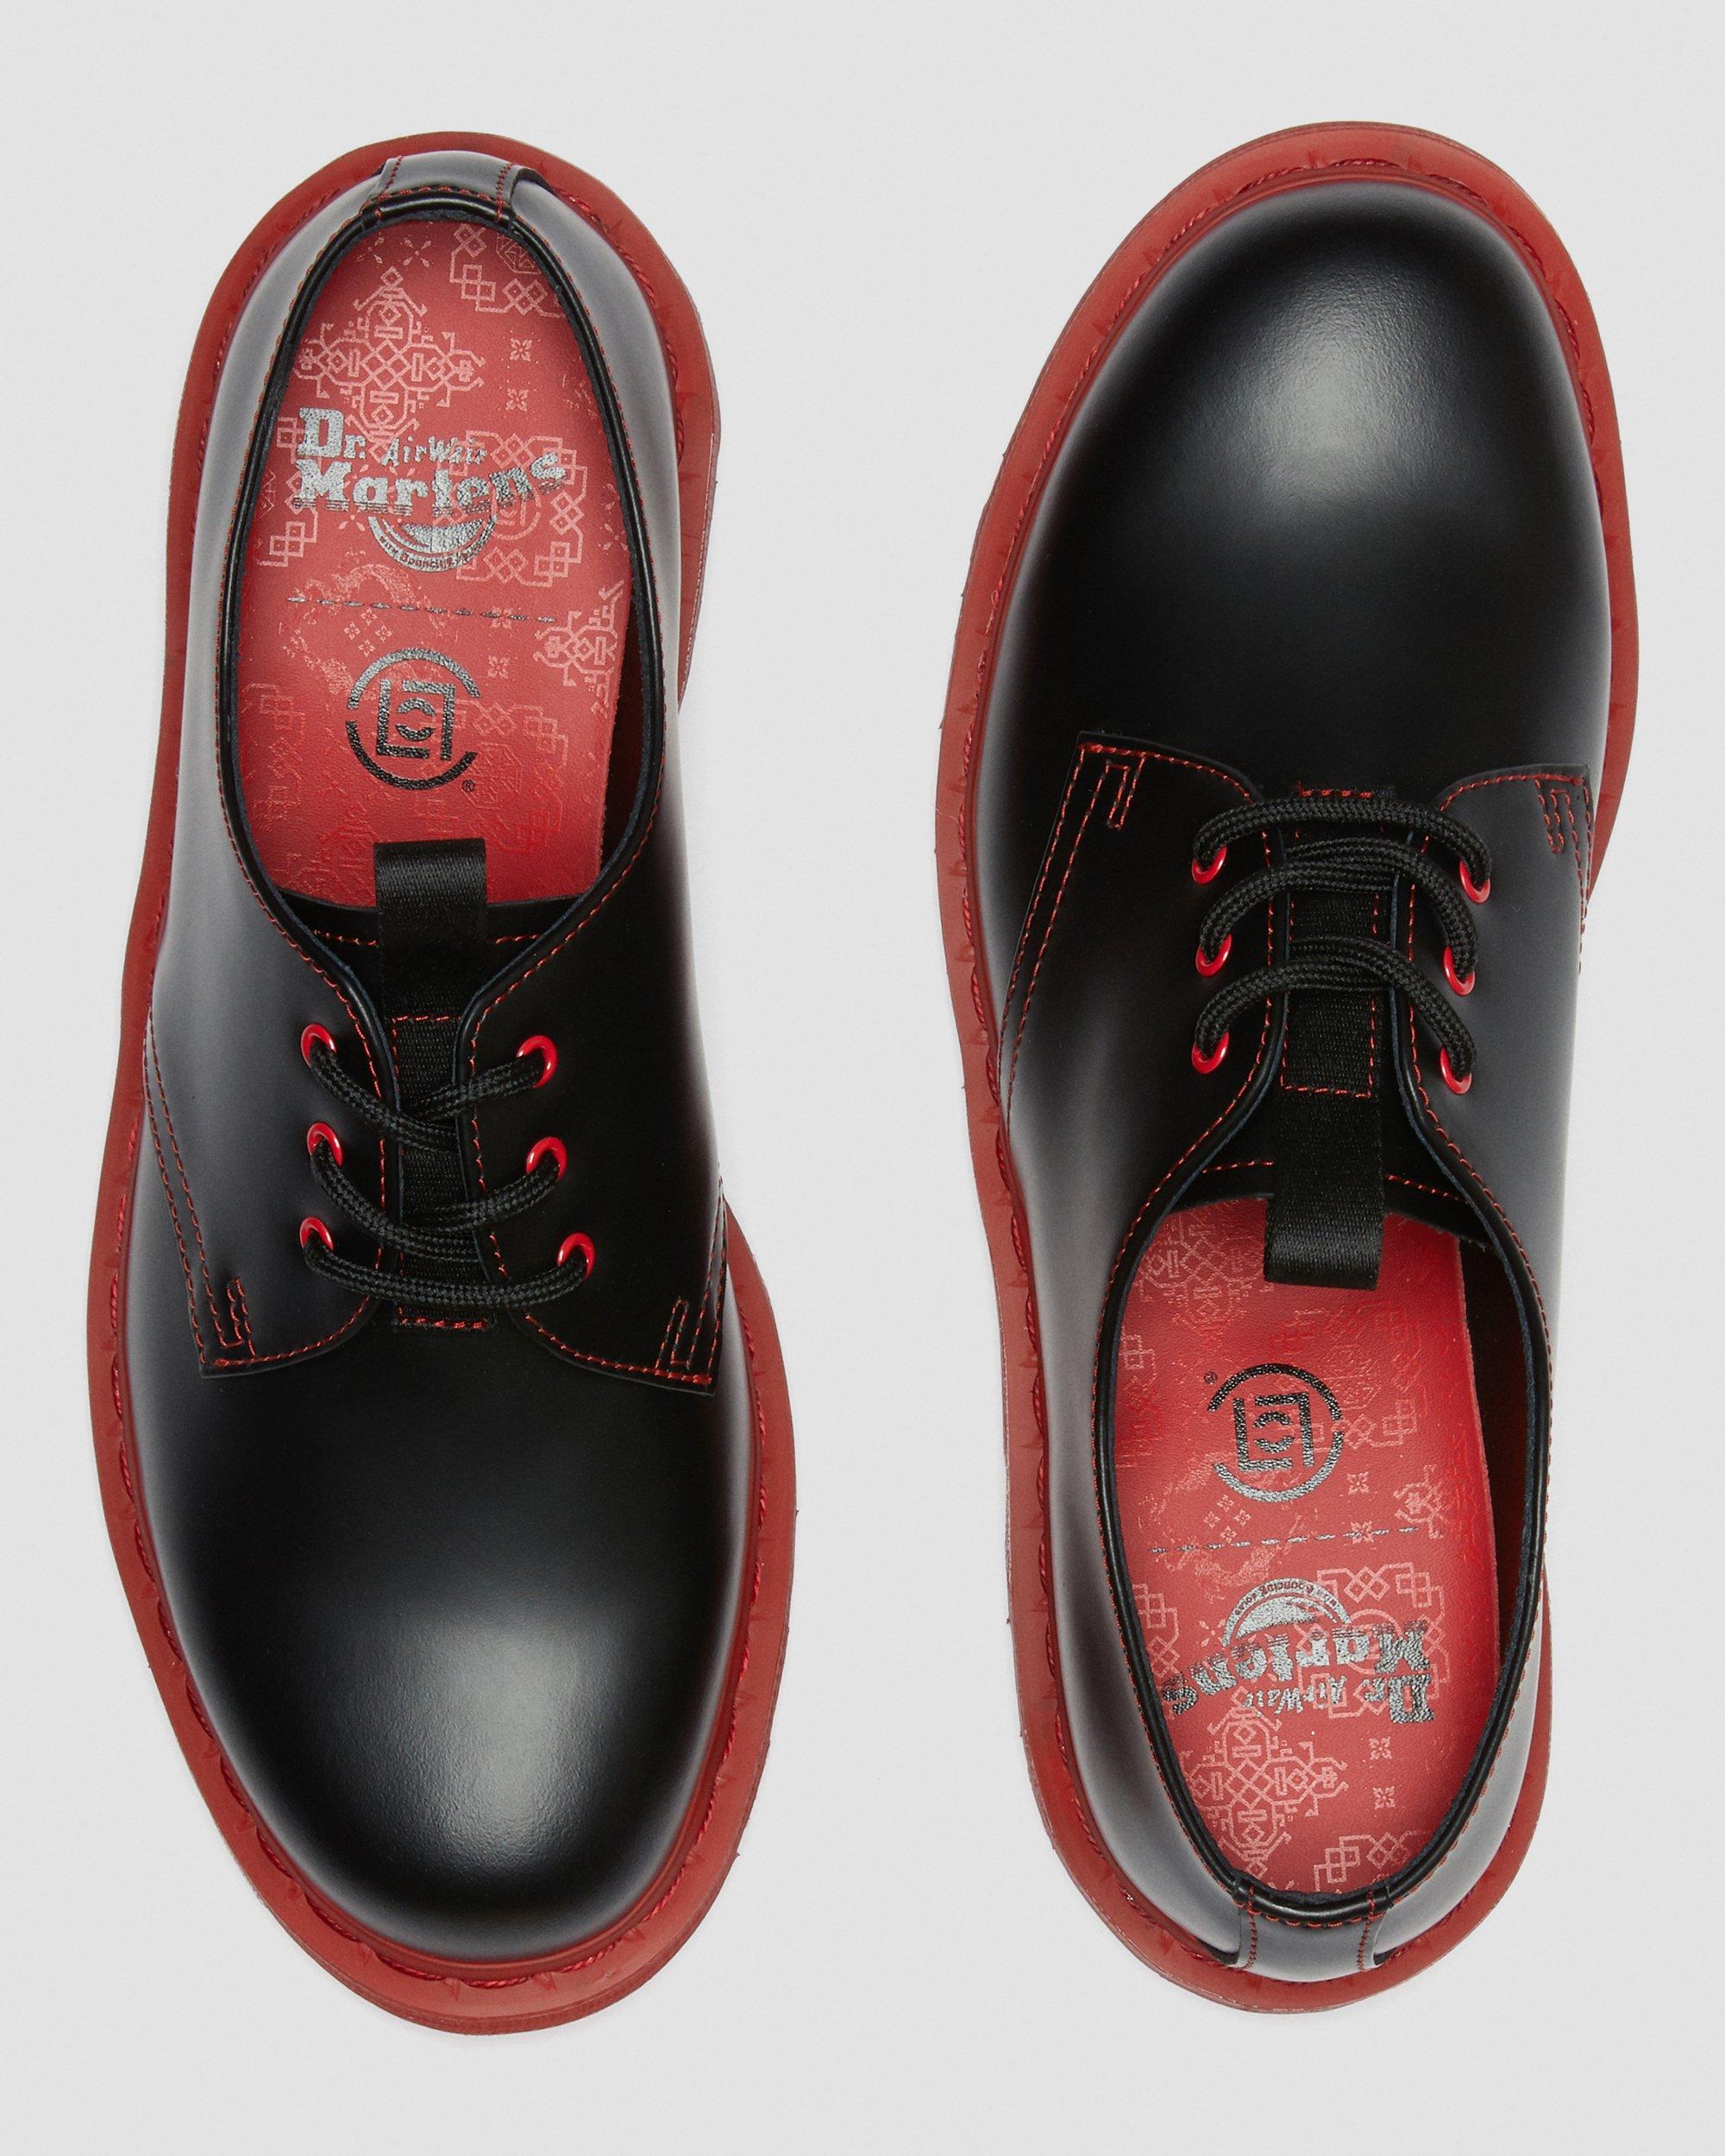 https://i1.adis.ws/i/drmartens/27153001.88.jpg?$large$1461 CLOT Leather Oxford Shoes Dr. Martens